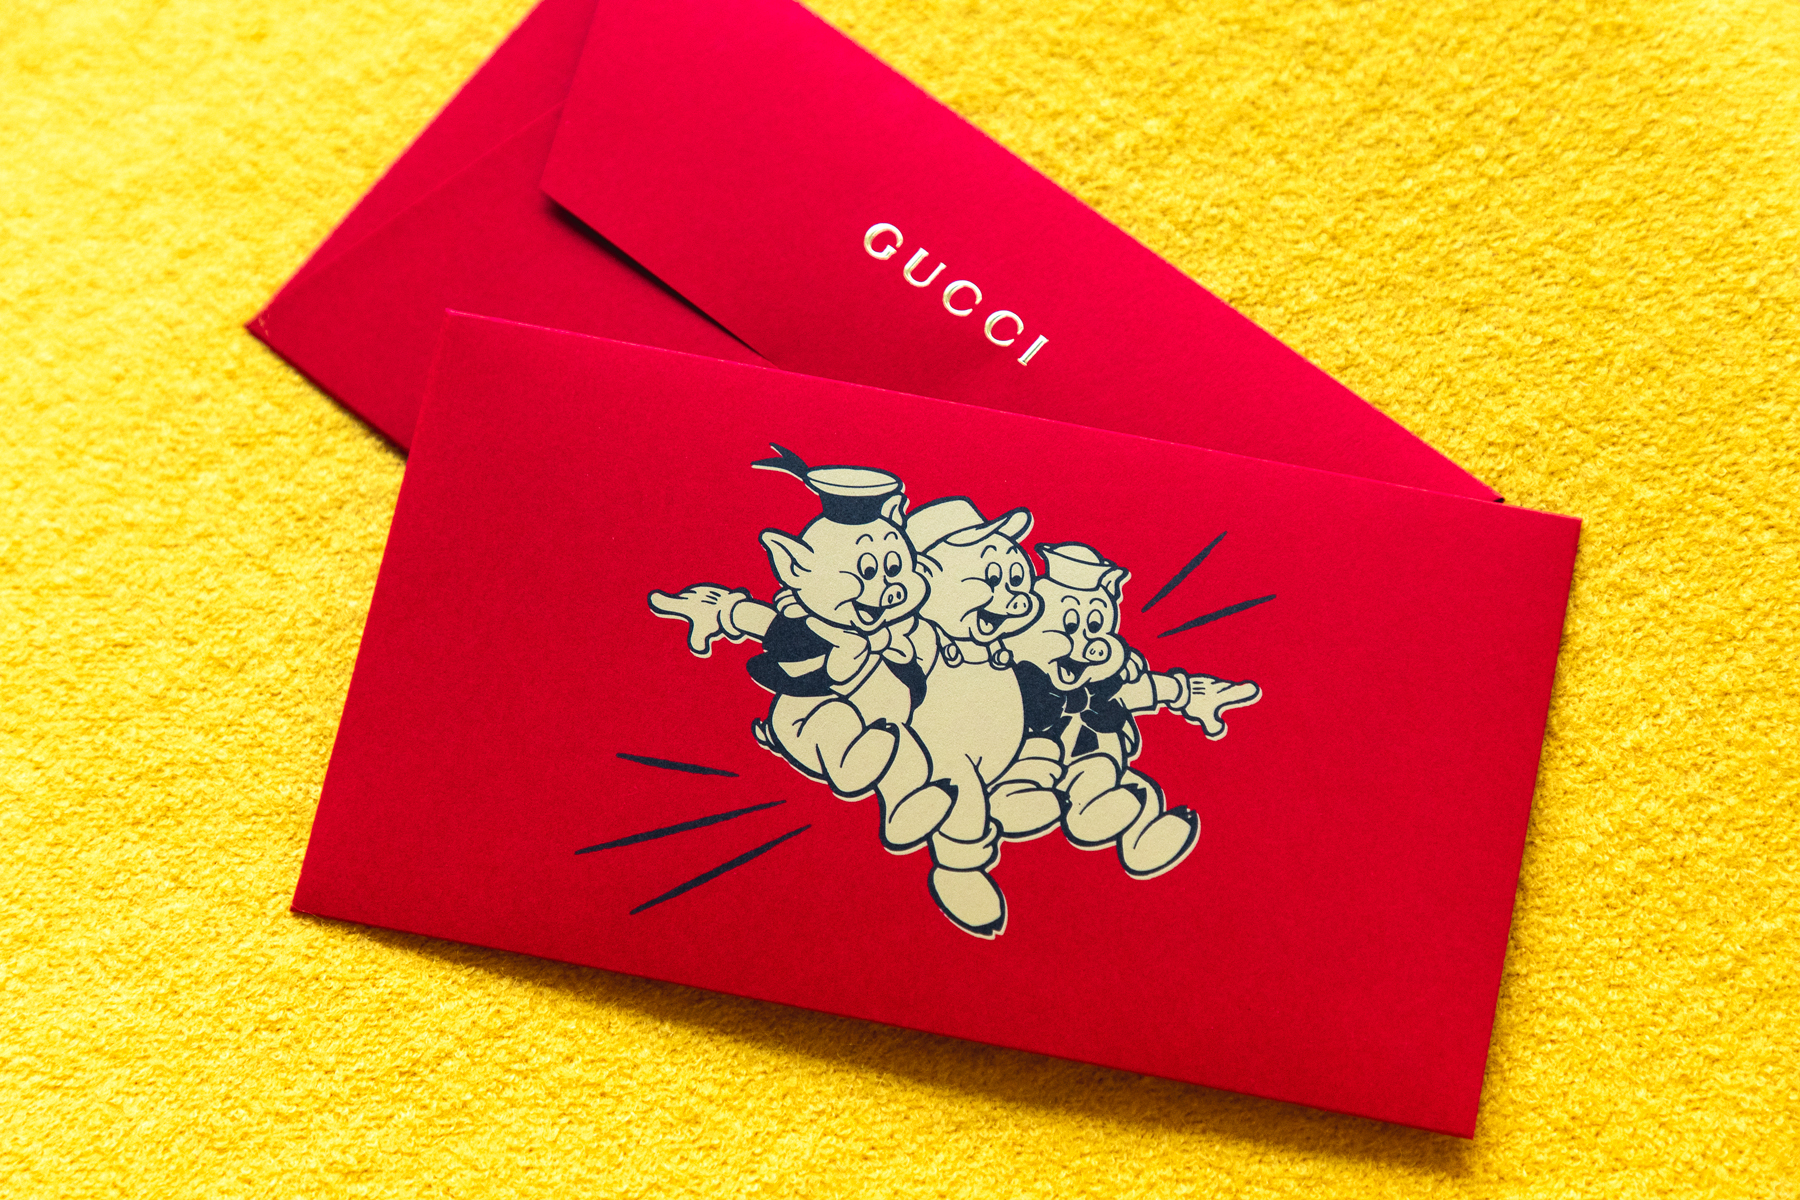 Here’s How Brands Are Celebrating Lunar New Year With Traditional “Red Envelopes” – Renowned